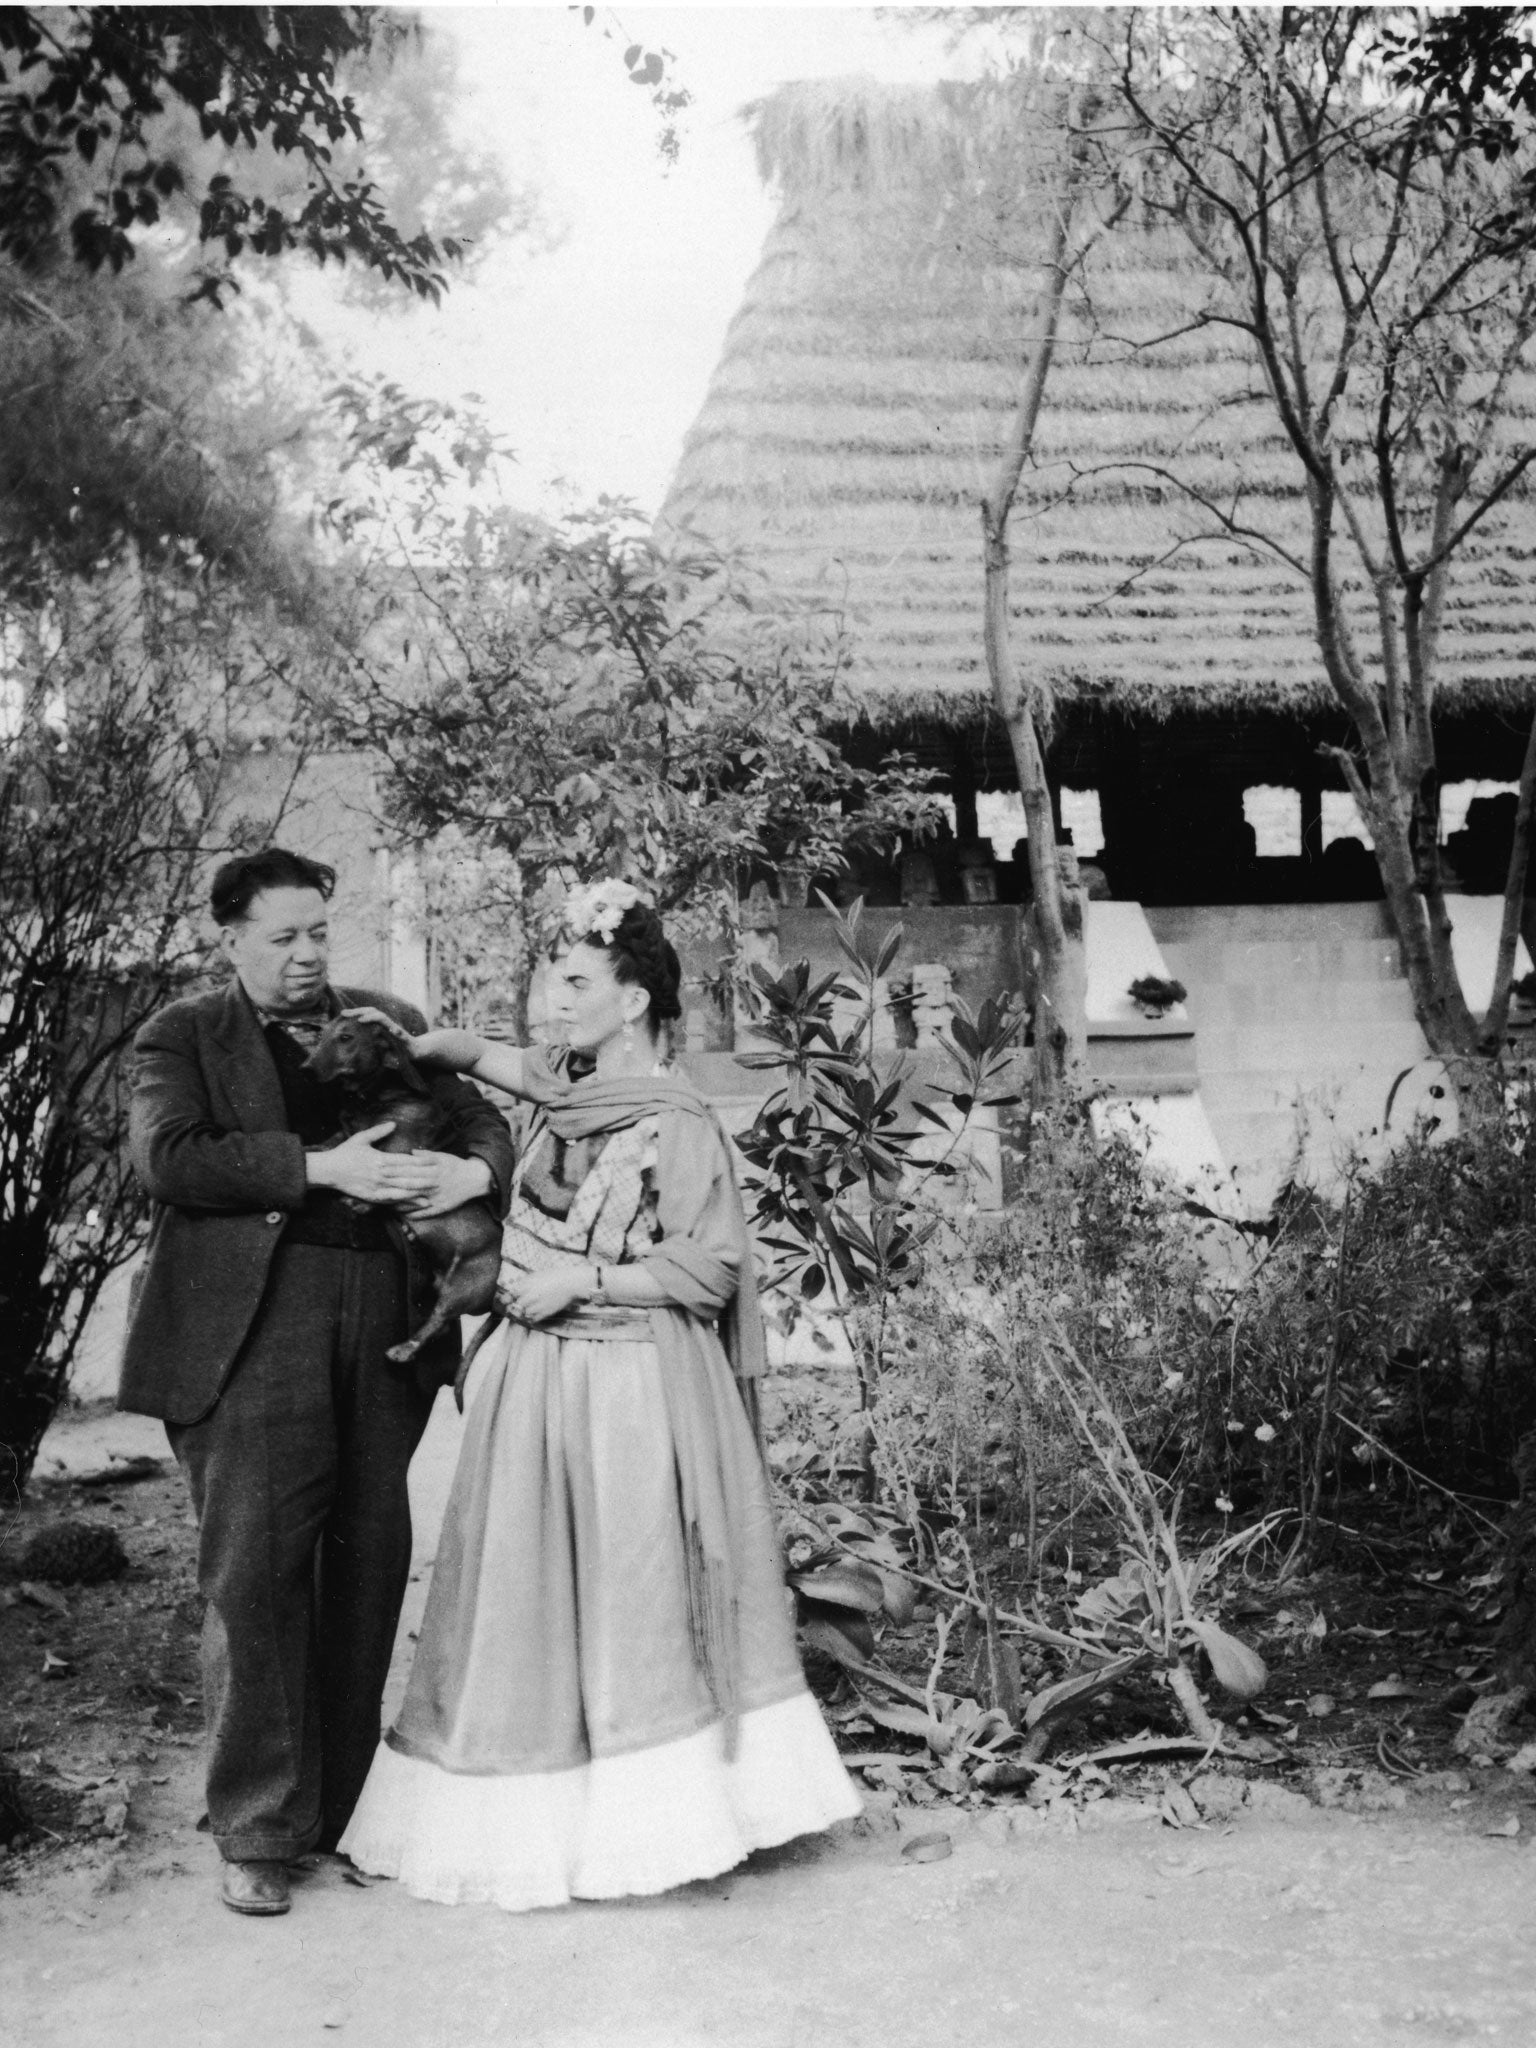 Indissoluble connection: Frida Kahlo and her husband Diego Rivera